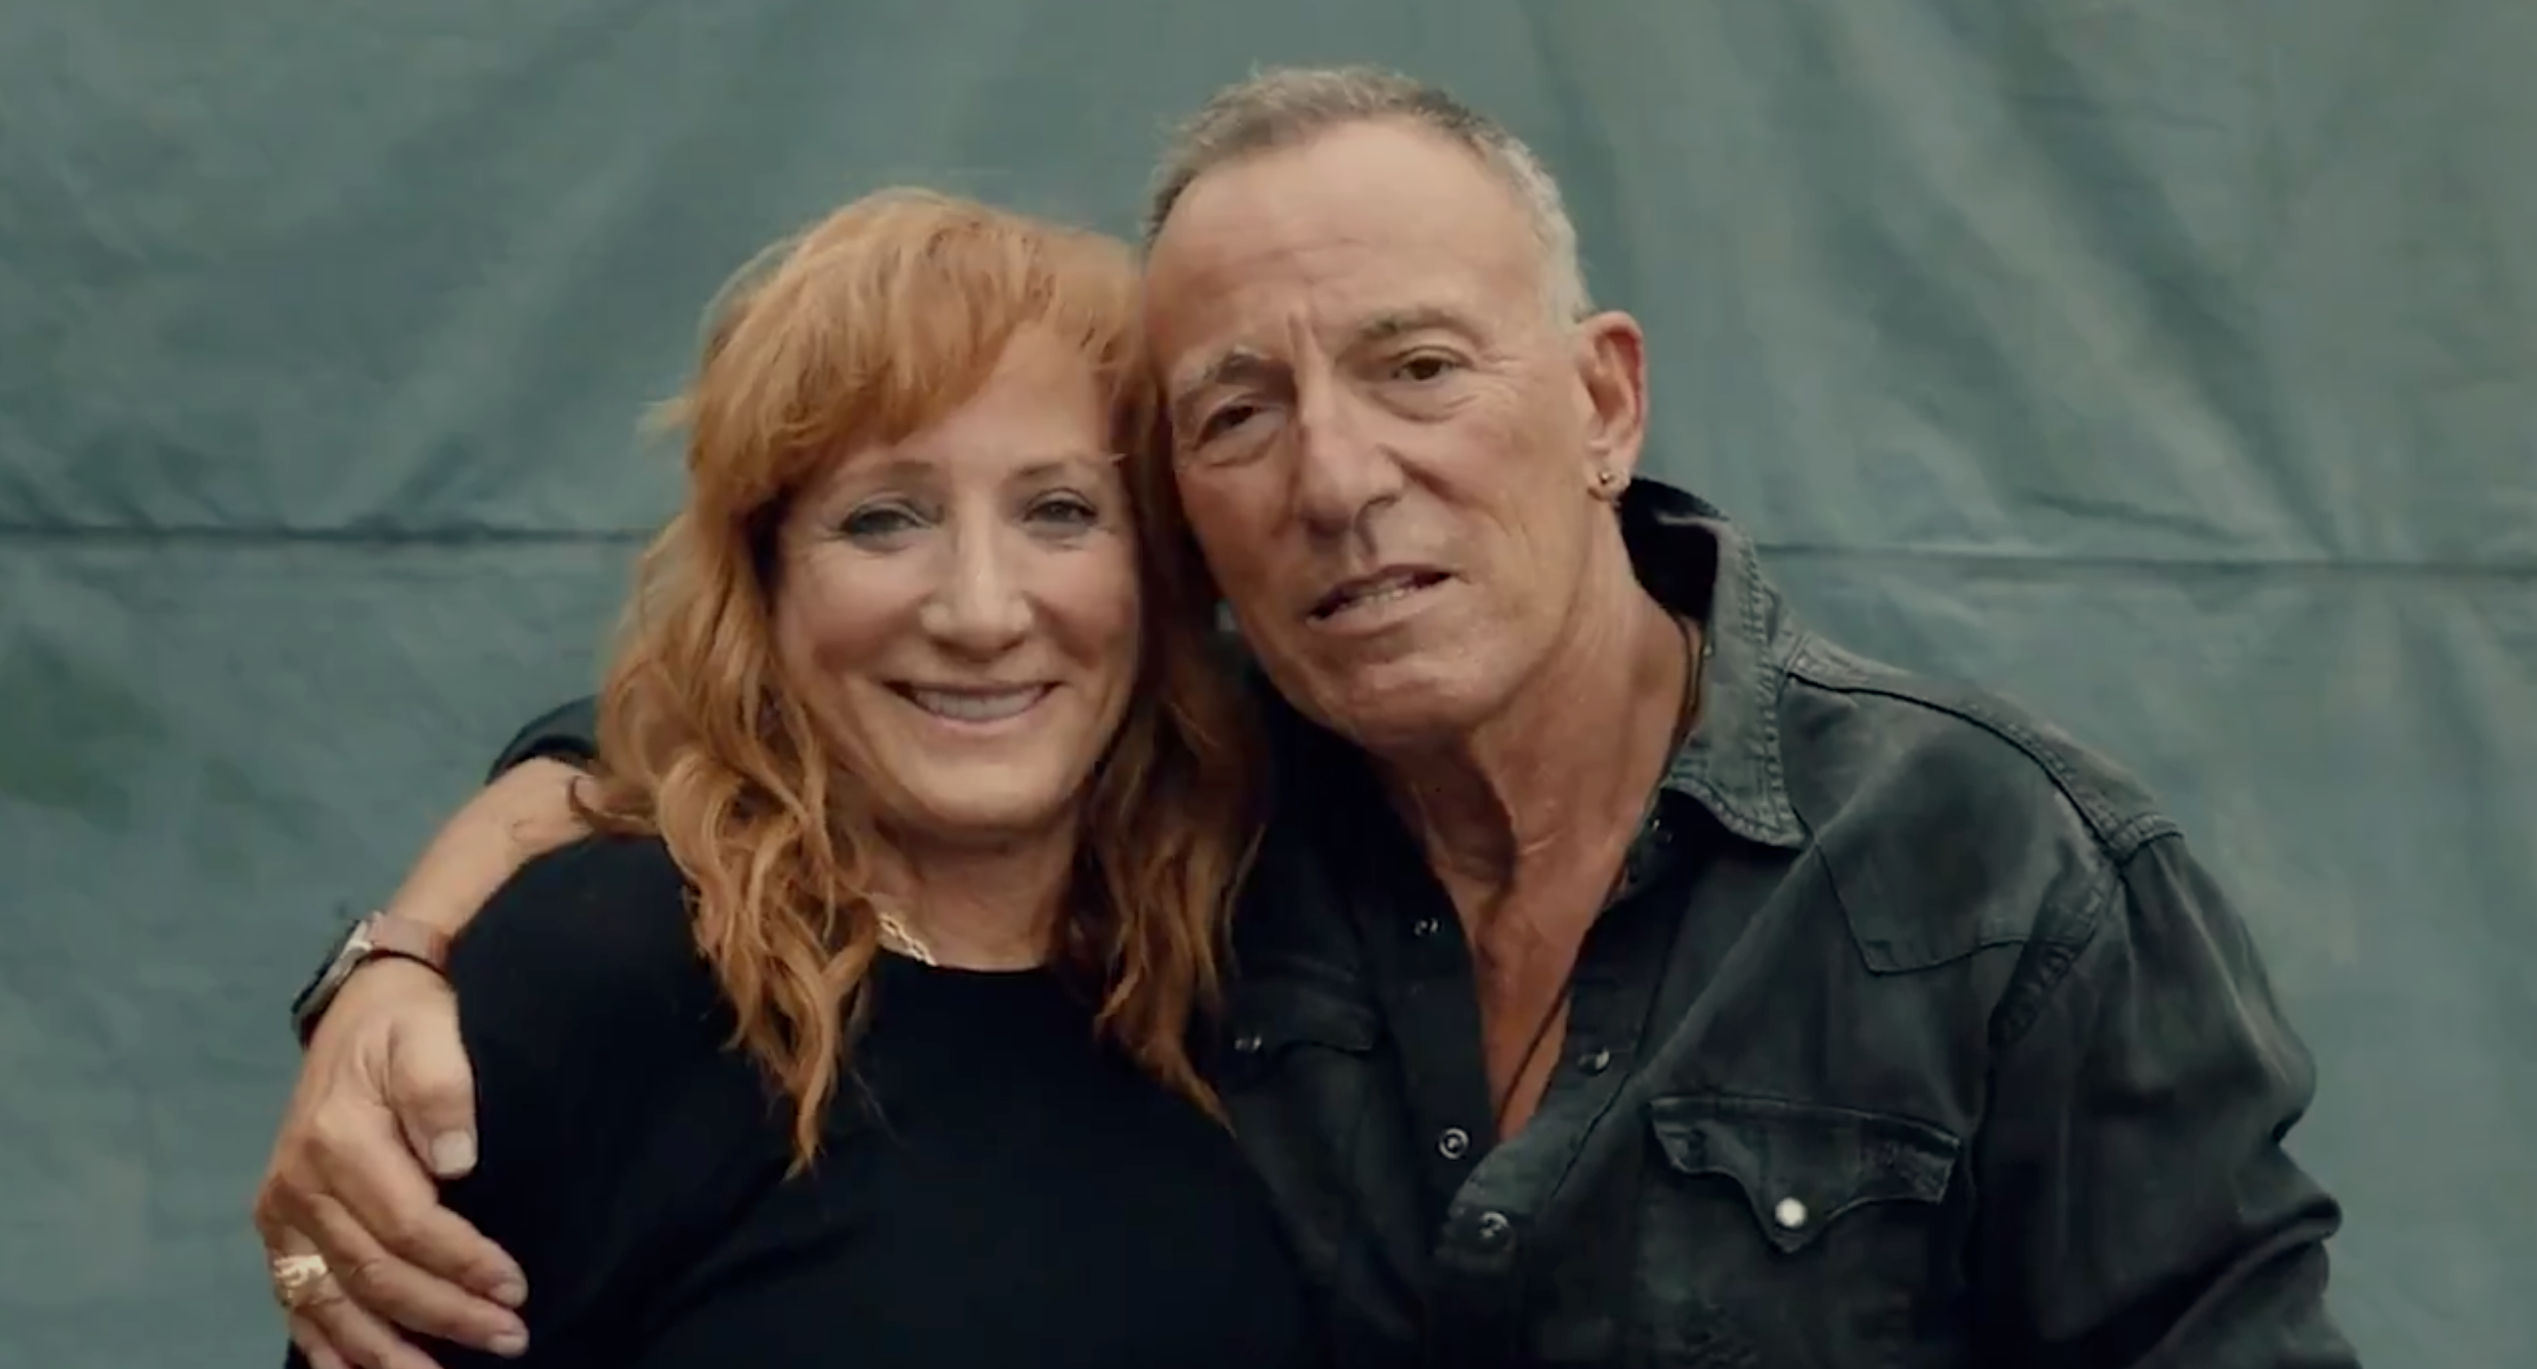 springsteen dating site)